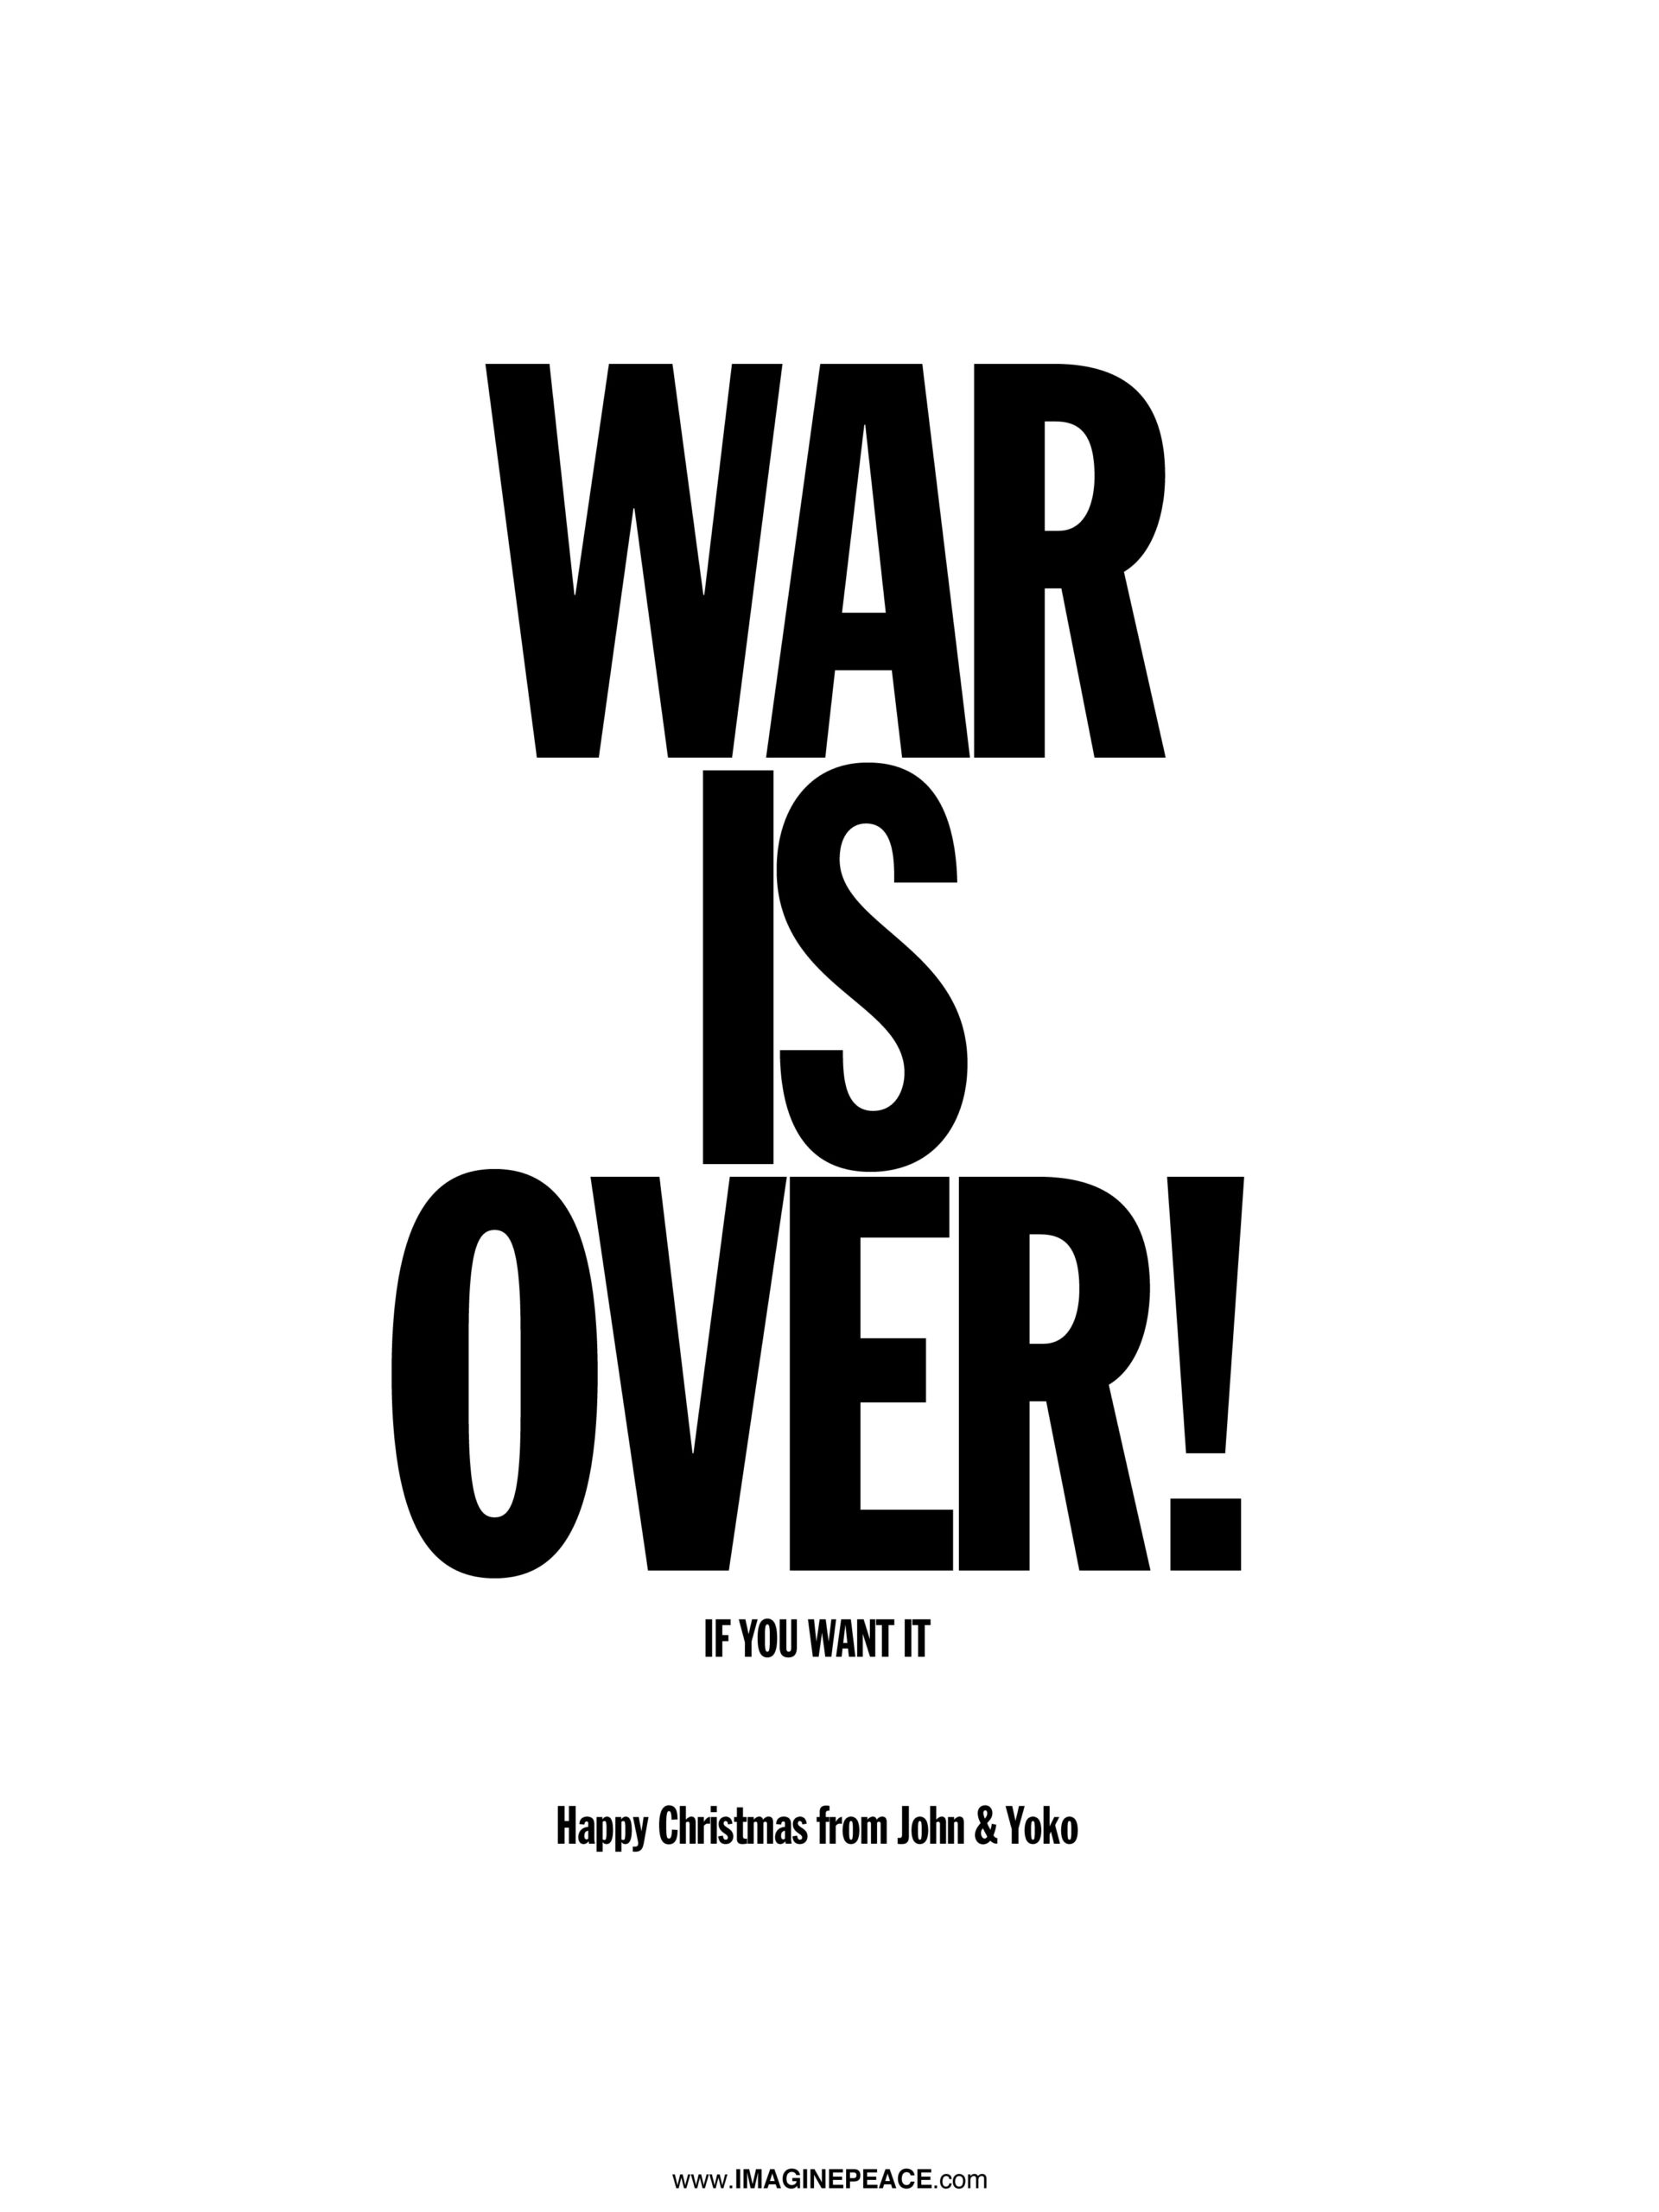 https://publicdelivery.org/wp-content/uploads/2021/06/War-is-Over-poster-in-English-scaled.jpg